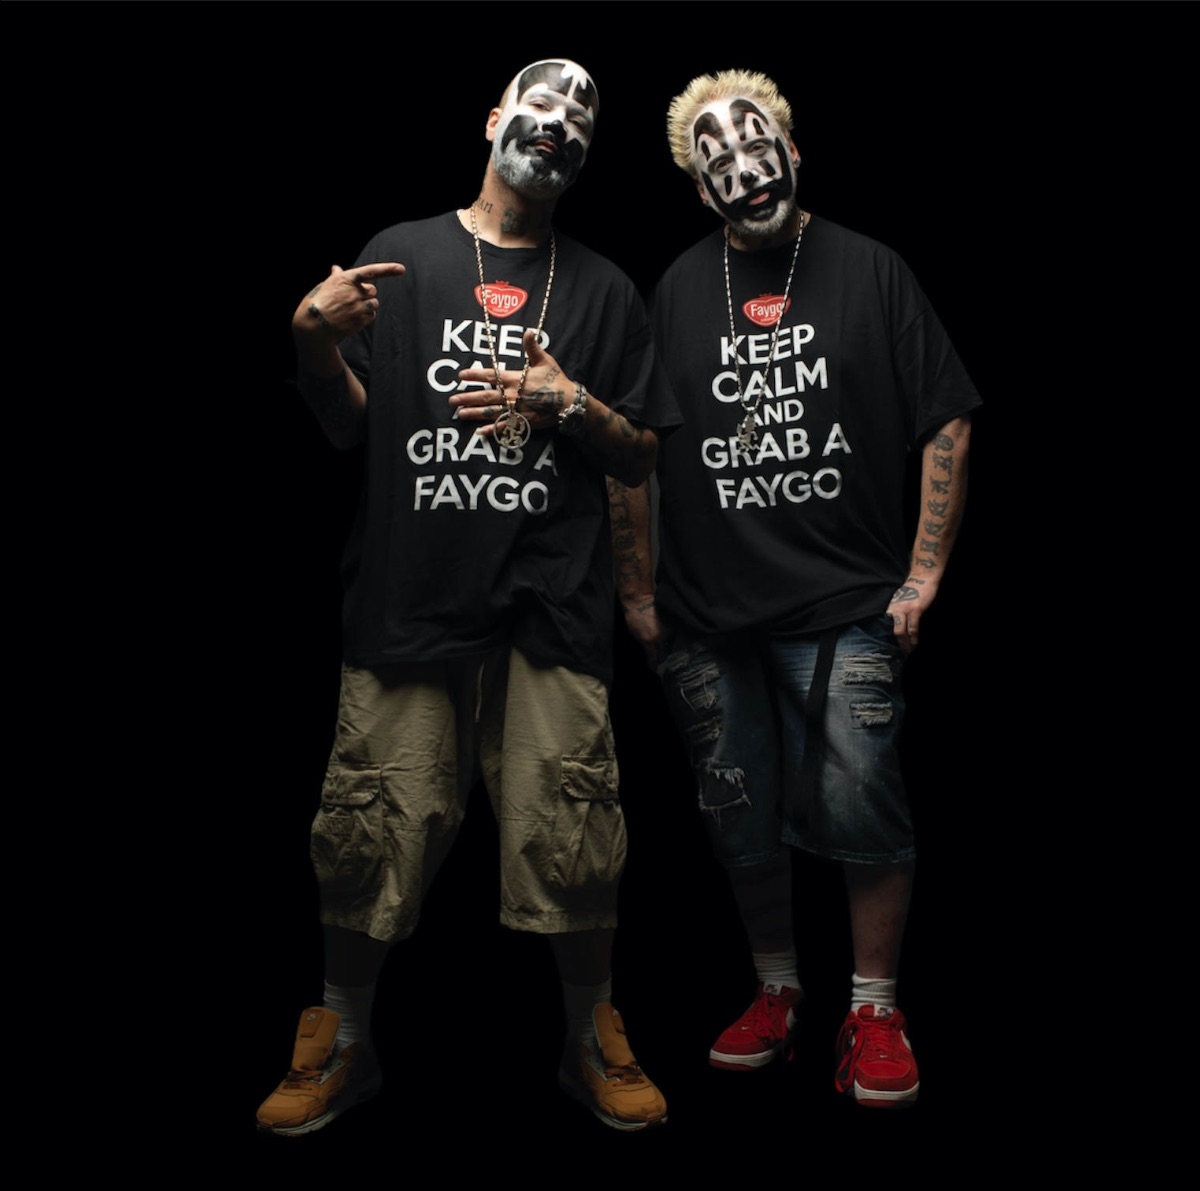 Insane Clown Posse Announce New Album "Yum Yum Bedlam" + Premiere First Single "Wretched" At Rolling Stone